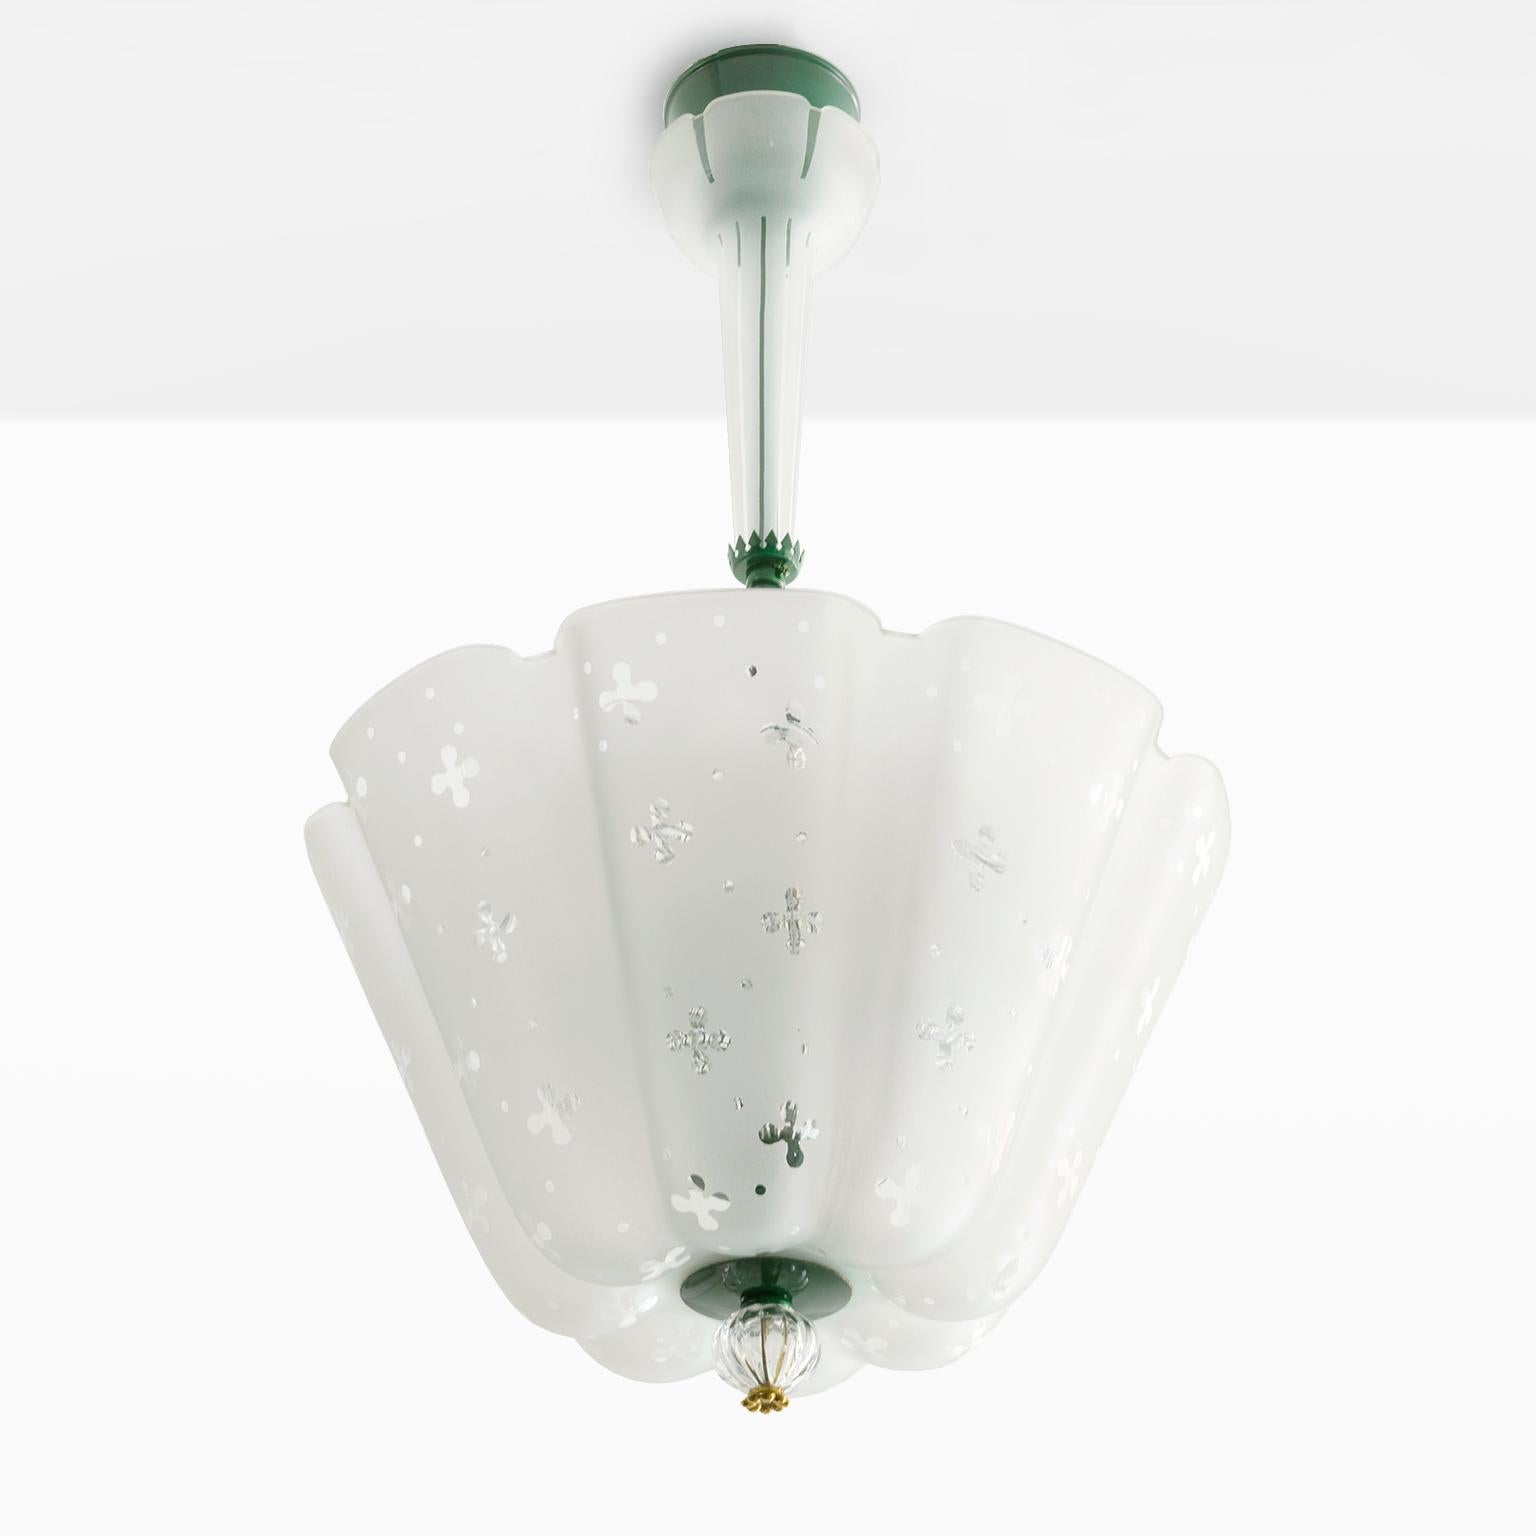 Nils Landberg designed chandelier for Orrefors, Sweden, circa 1940s. The fixture has an acid etched, soft undulating form outer shade with an overall polished clear glass pattern. The inner clear glass shade hold 3 standard base light sockets. The